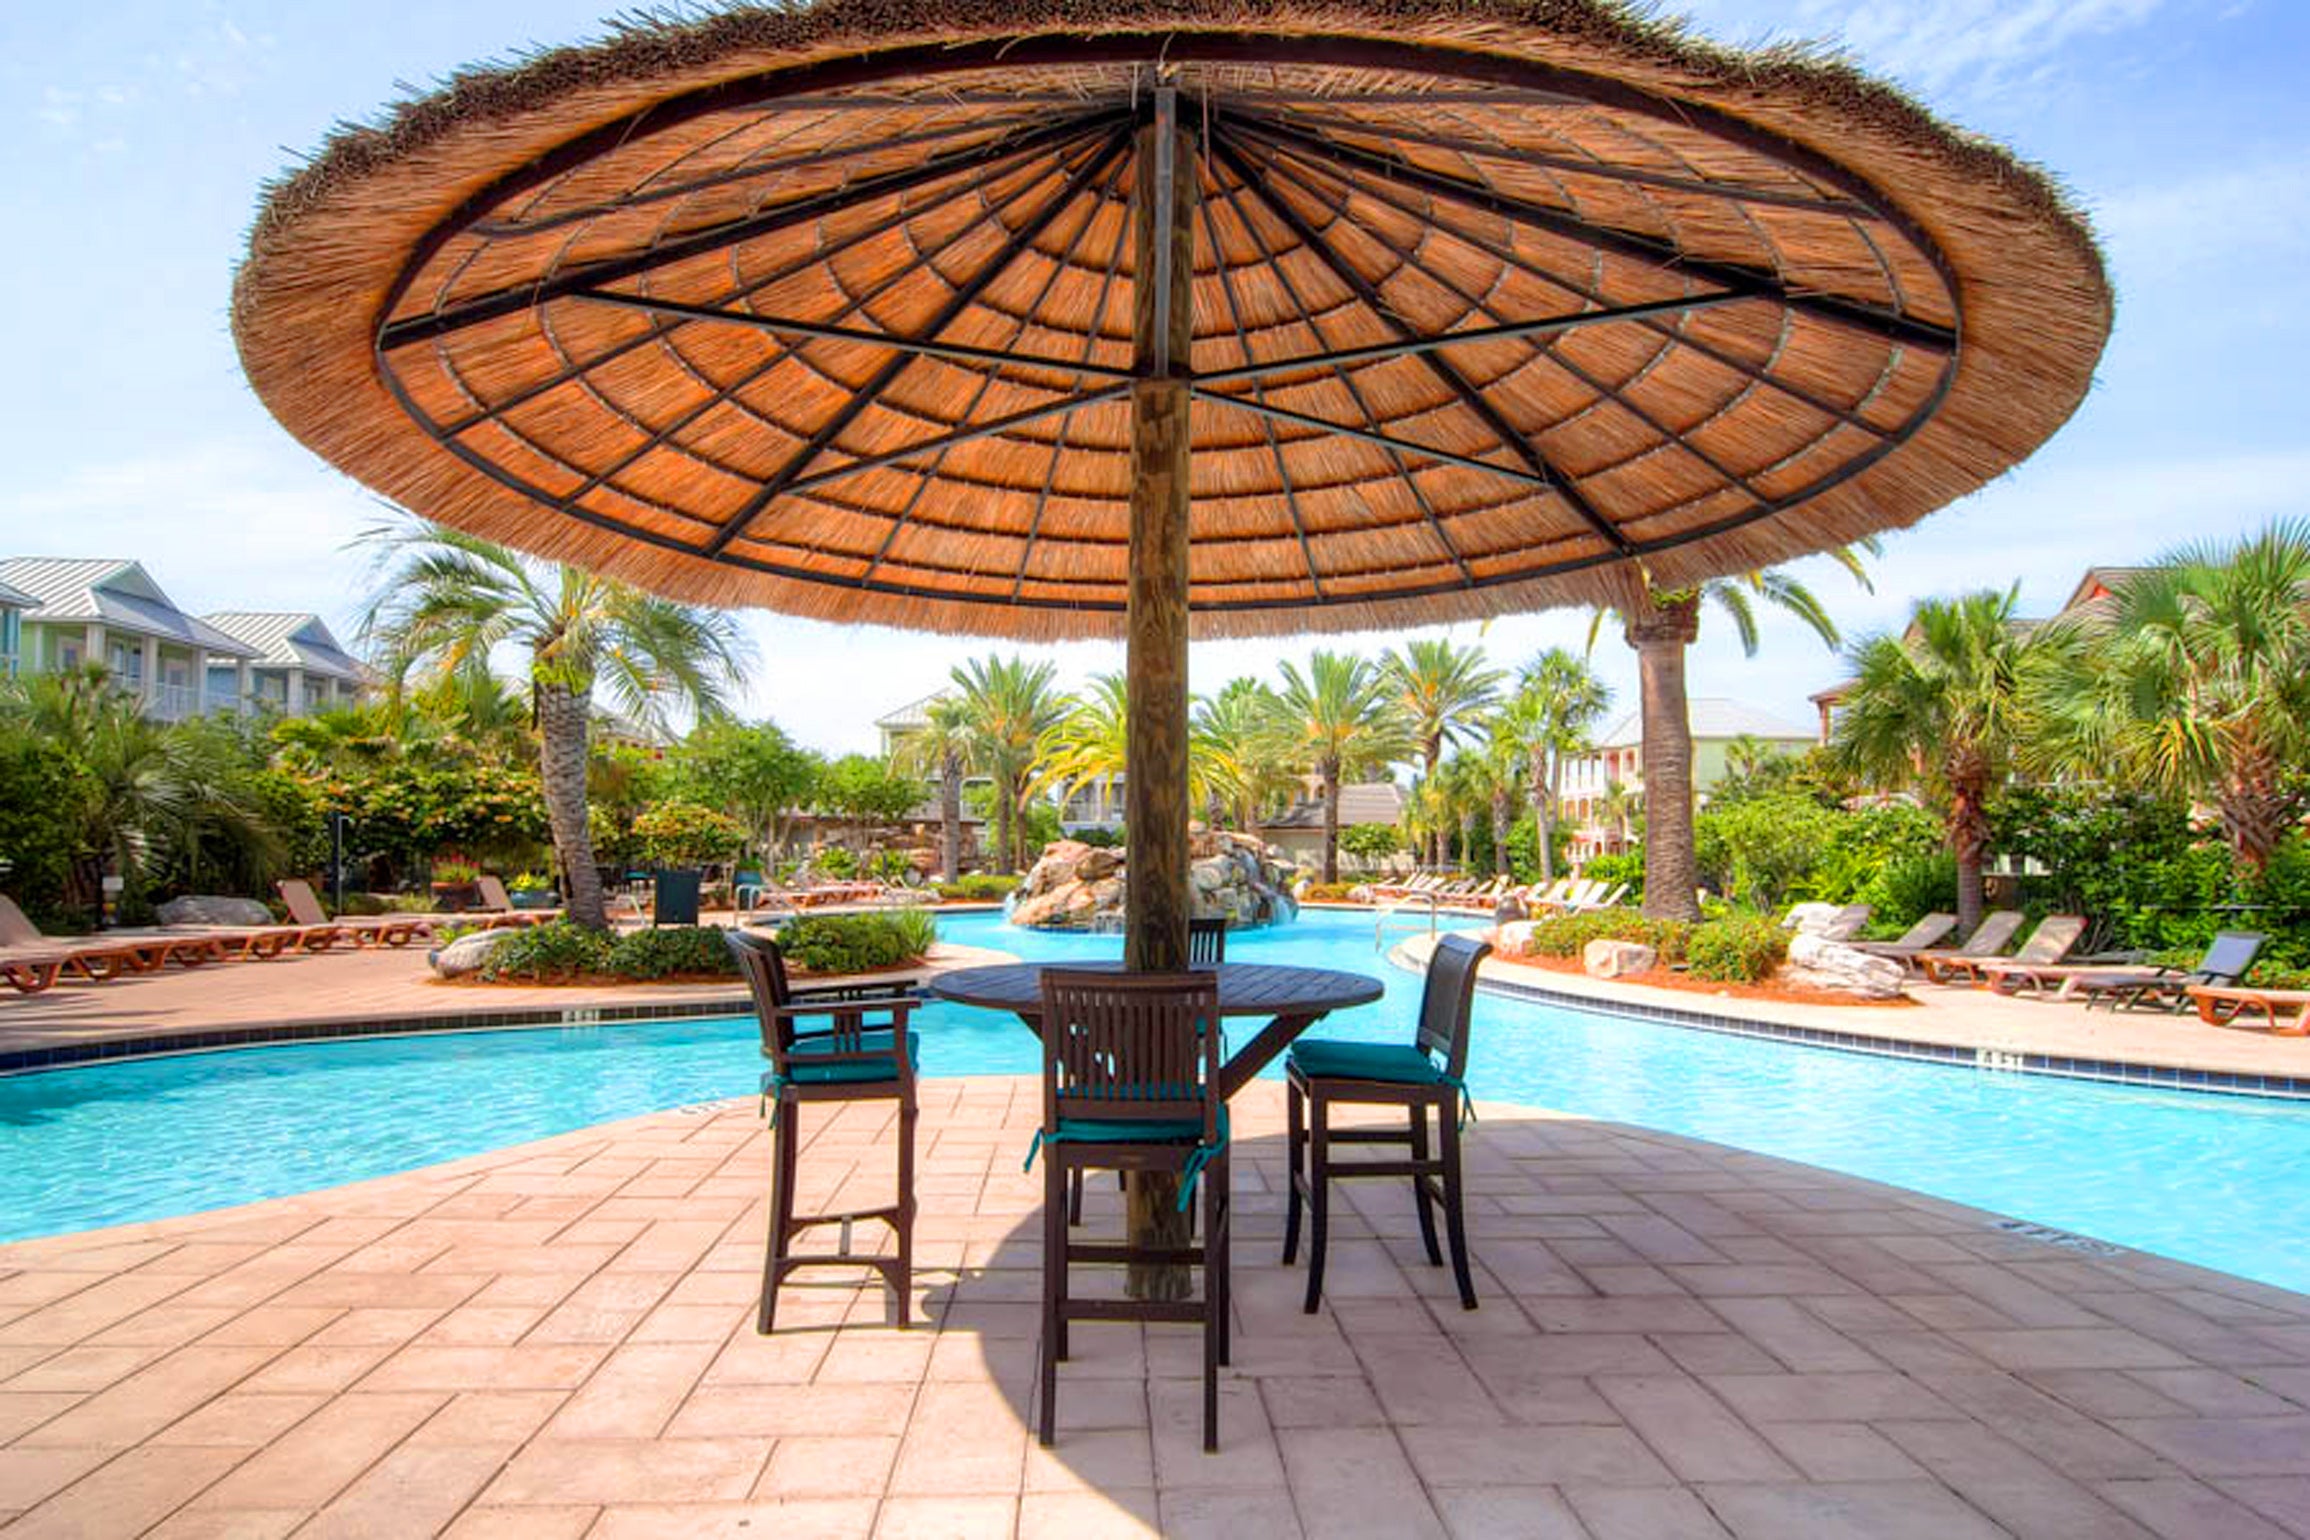 Palapa Shaded Tables- Villages of Crystal Beach